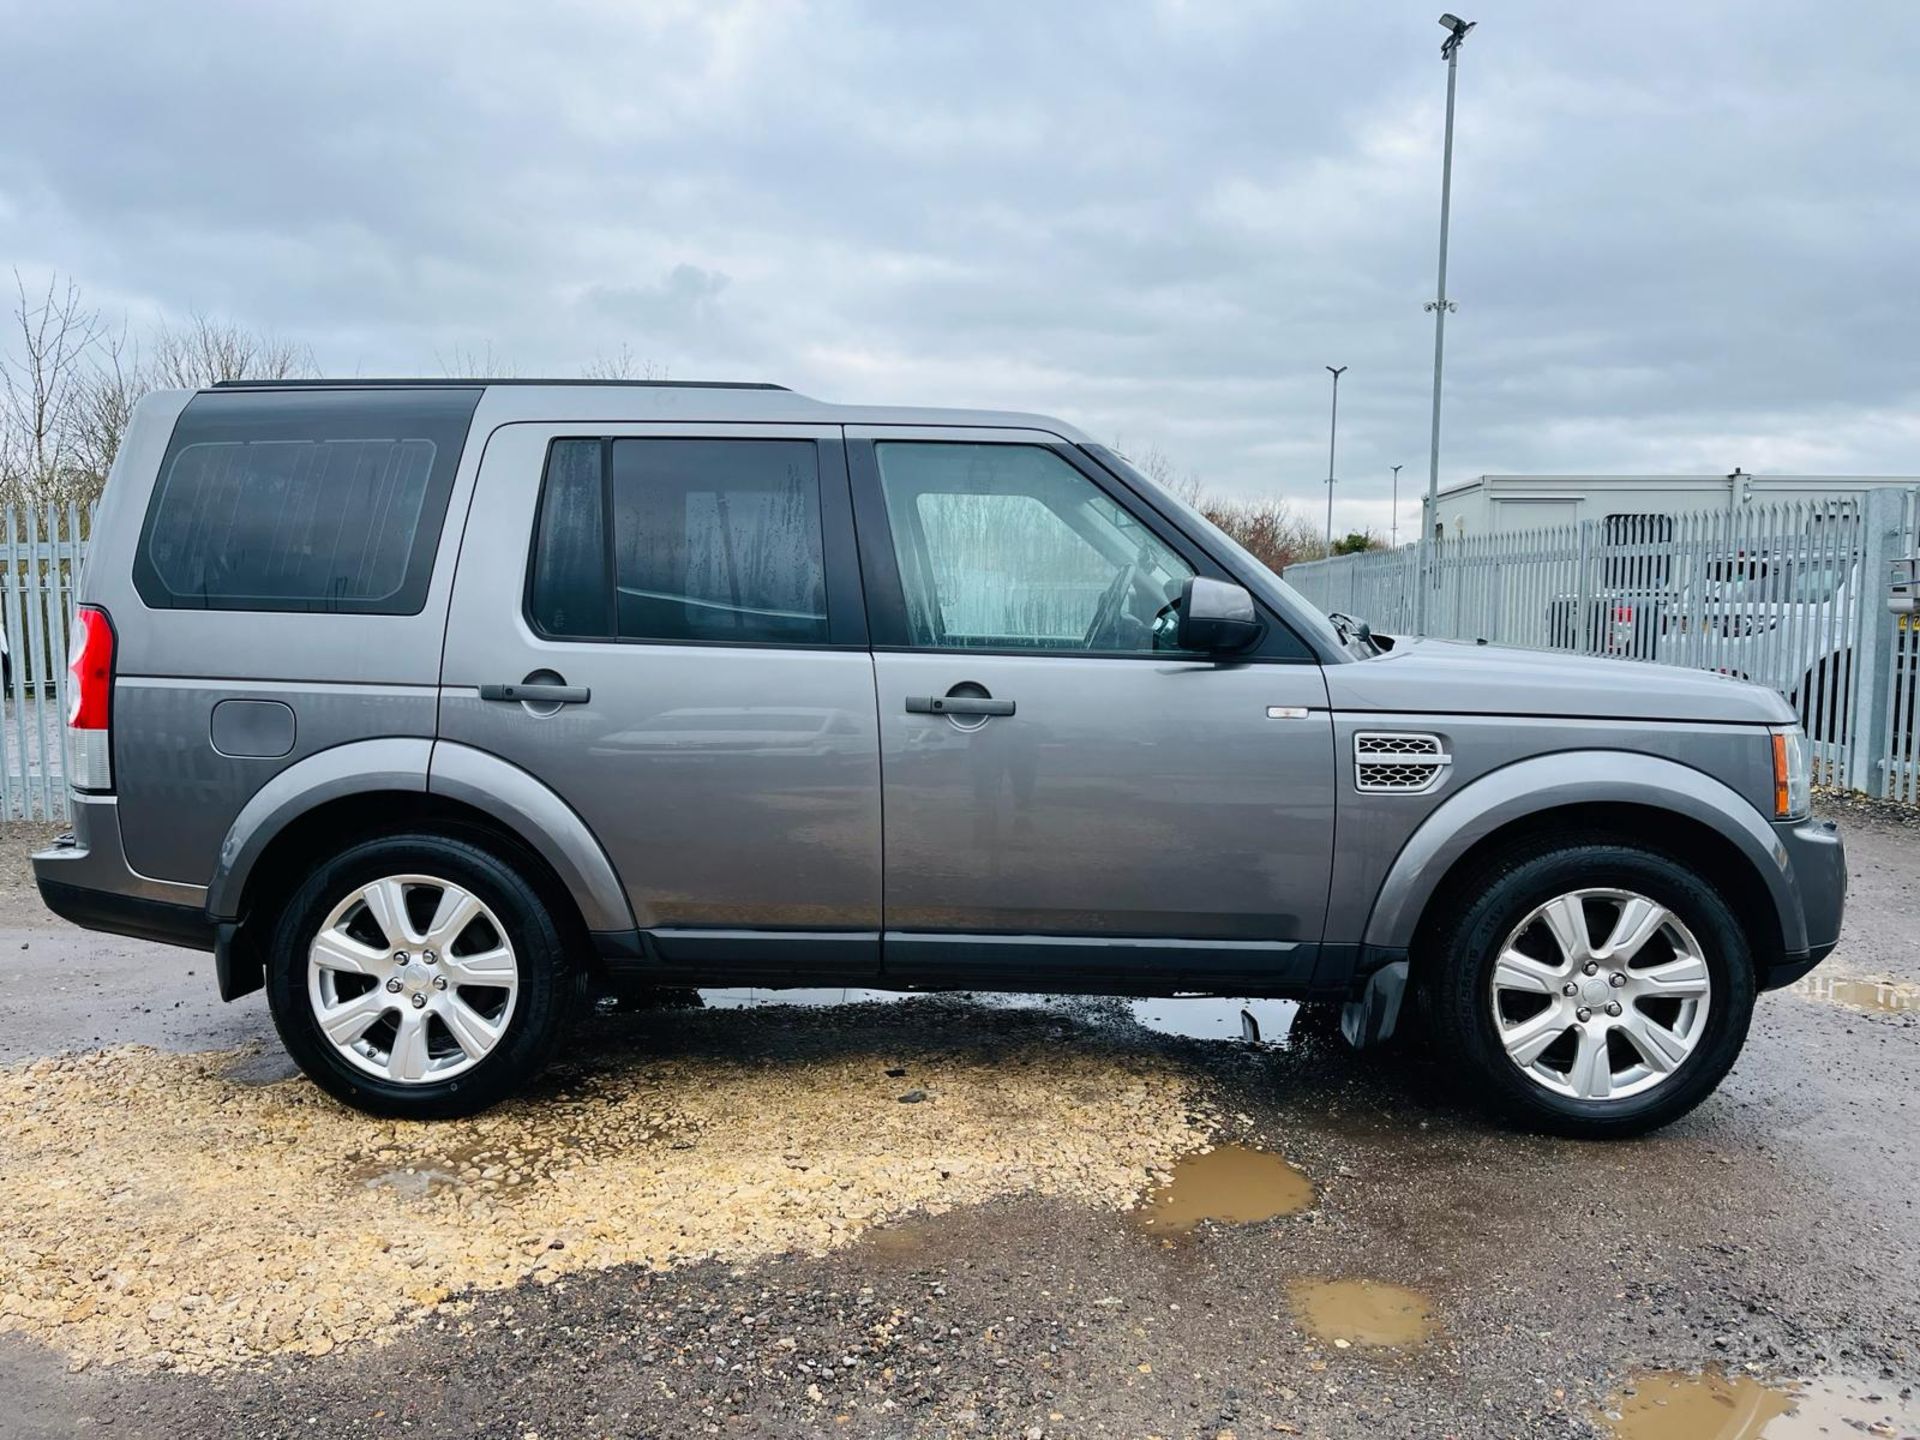 ** ON SALE ** Land Rover Discovery 4 3.0 TDV6 HSE 4WD 2009 '59 Reg' Full Spec - No Vat - 7 Seats - Image 11 of 39